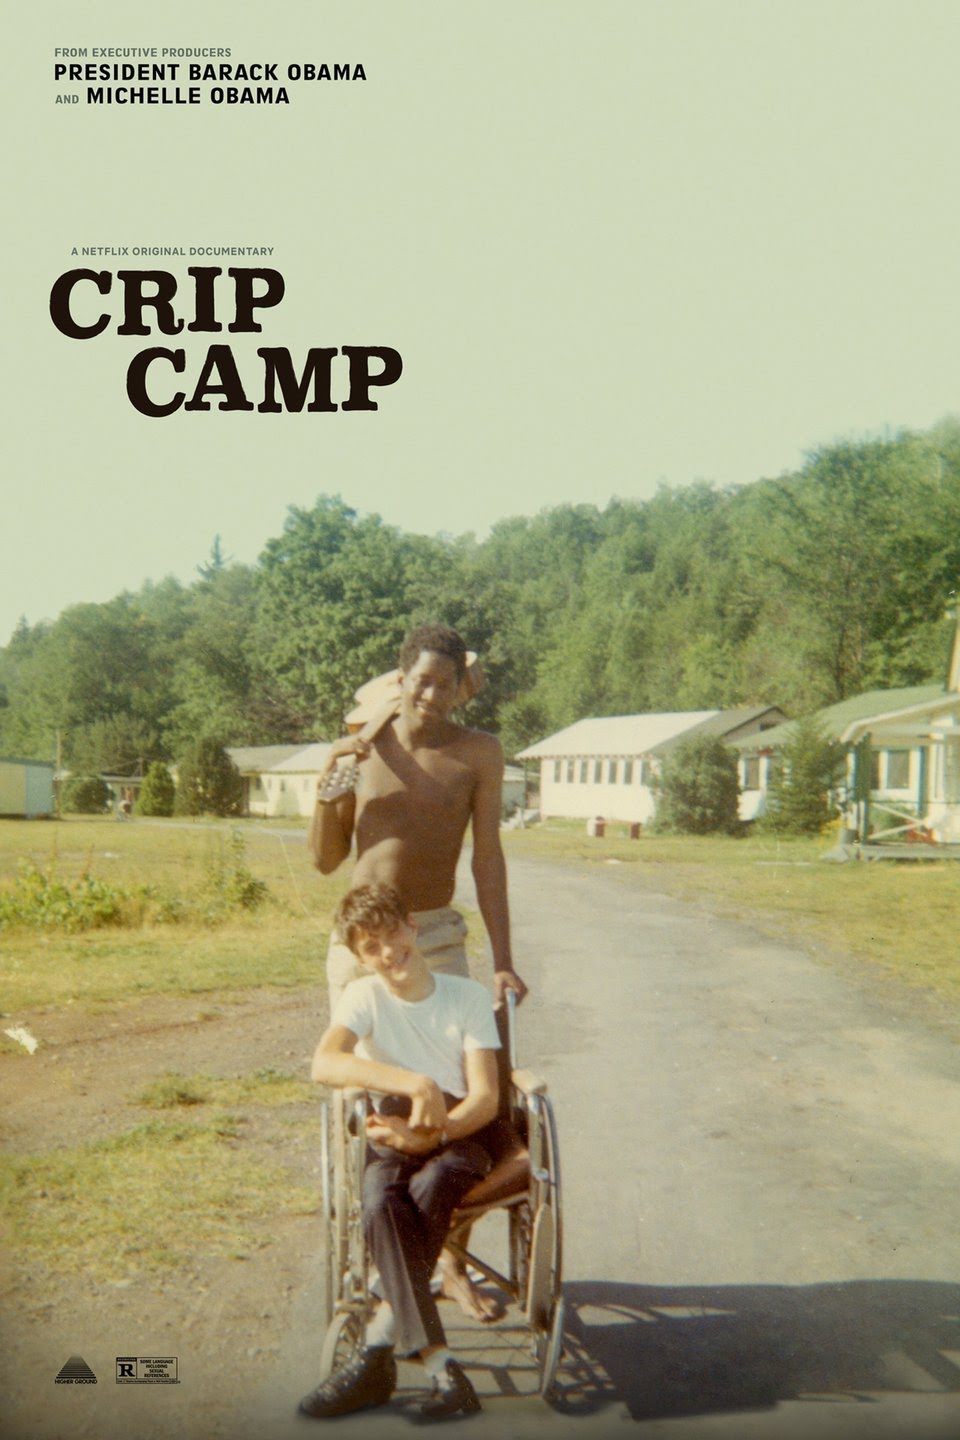 Crip Camp movie poster. A black teen boy poses with a guitar over his shoulder, standing behind a young wheelchair bound white boy in a rural setting.